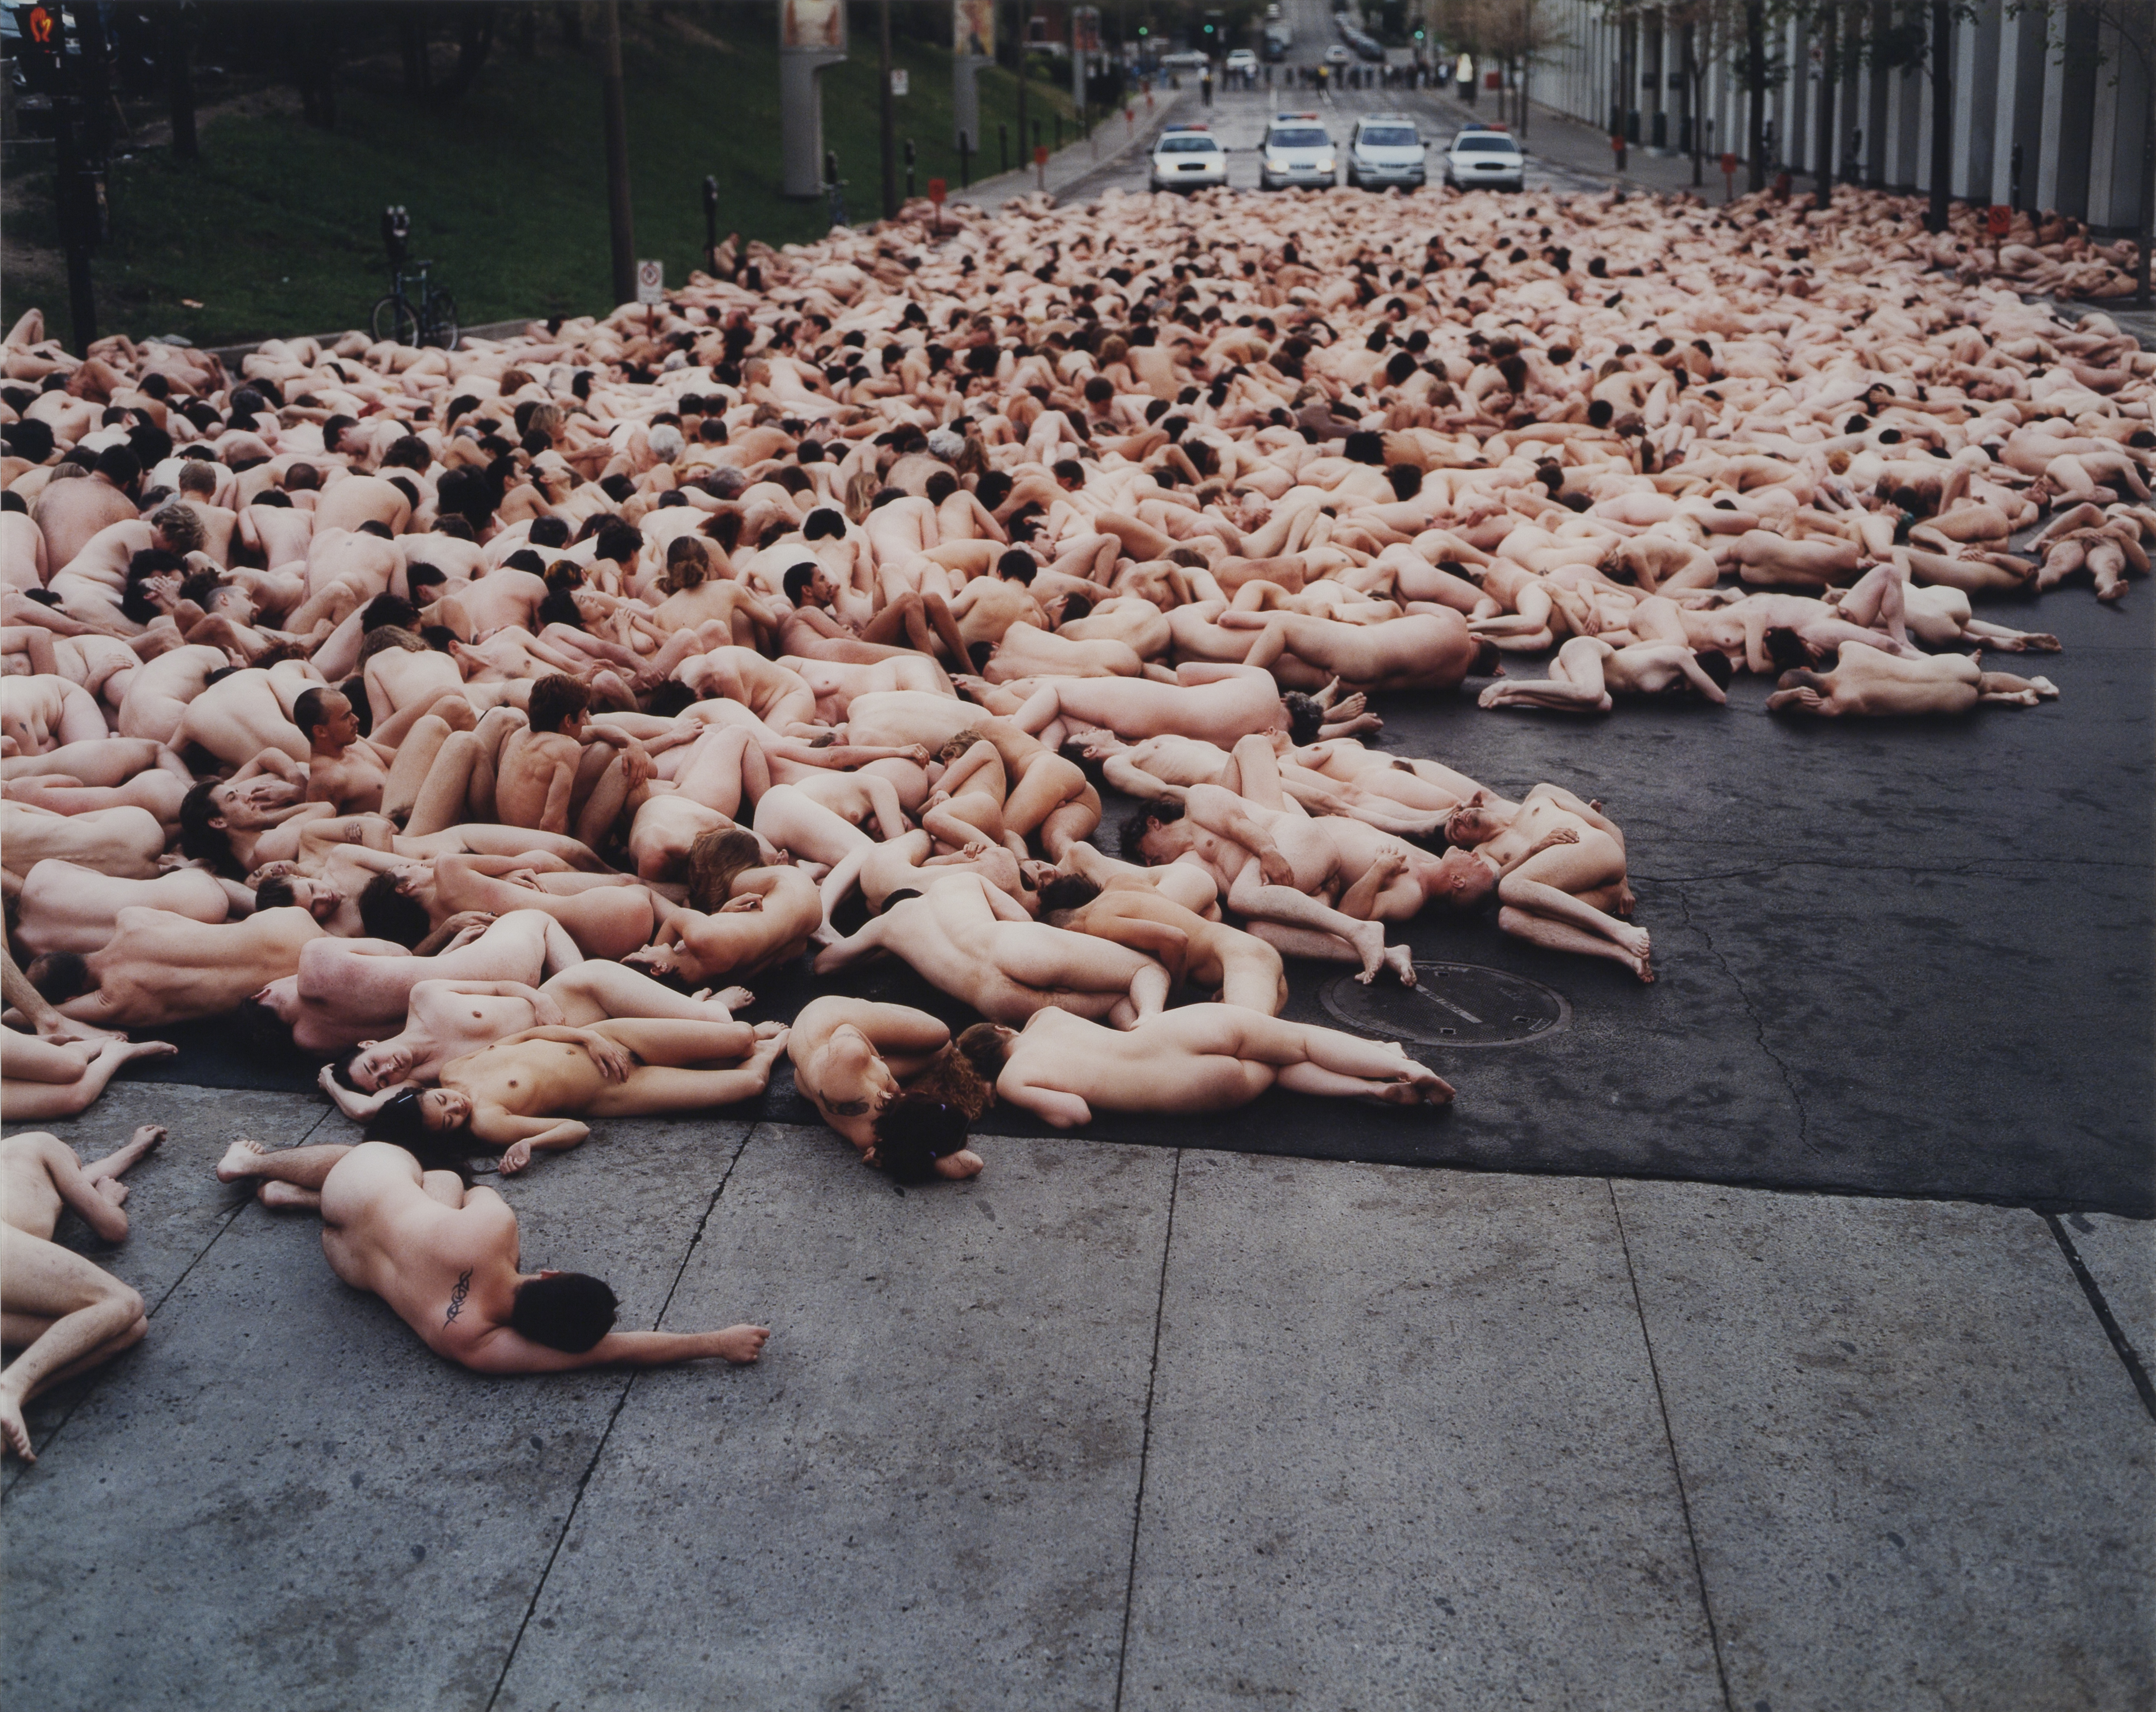 Photograph of naked people.